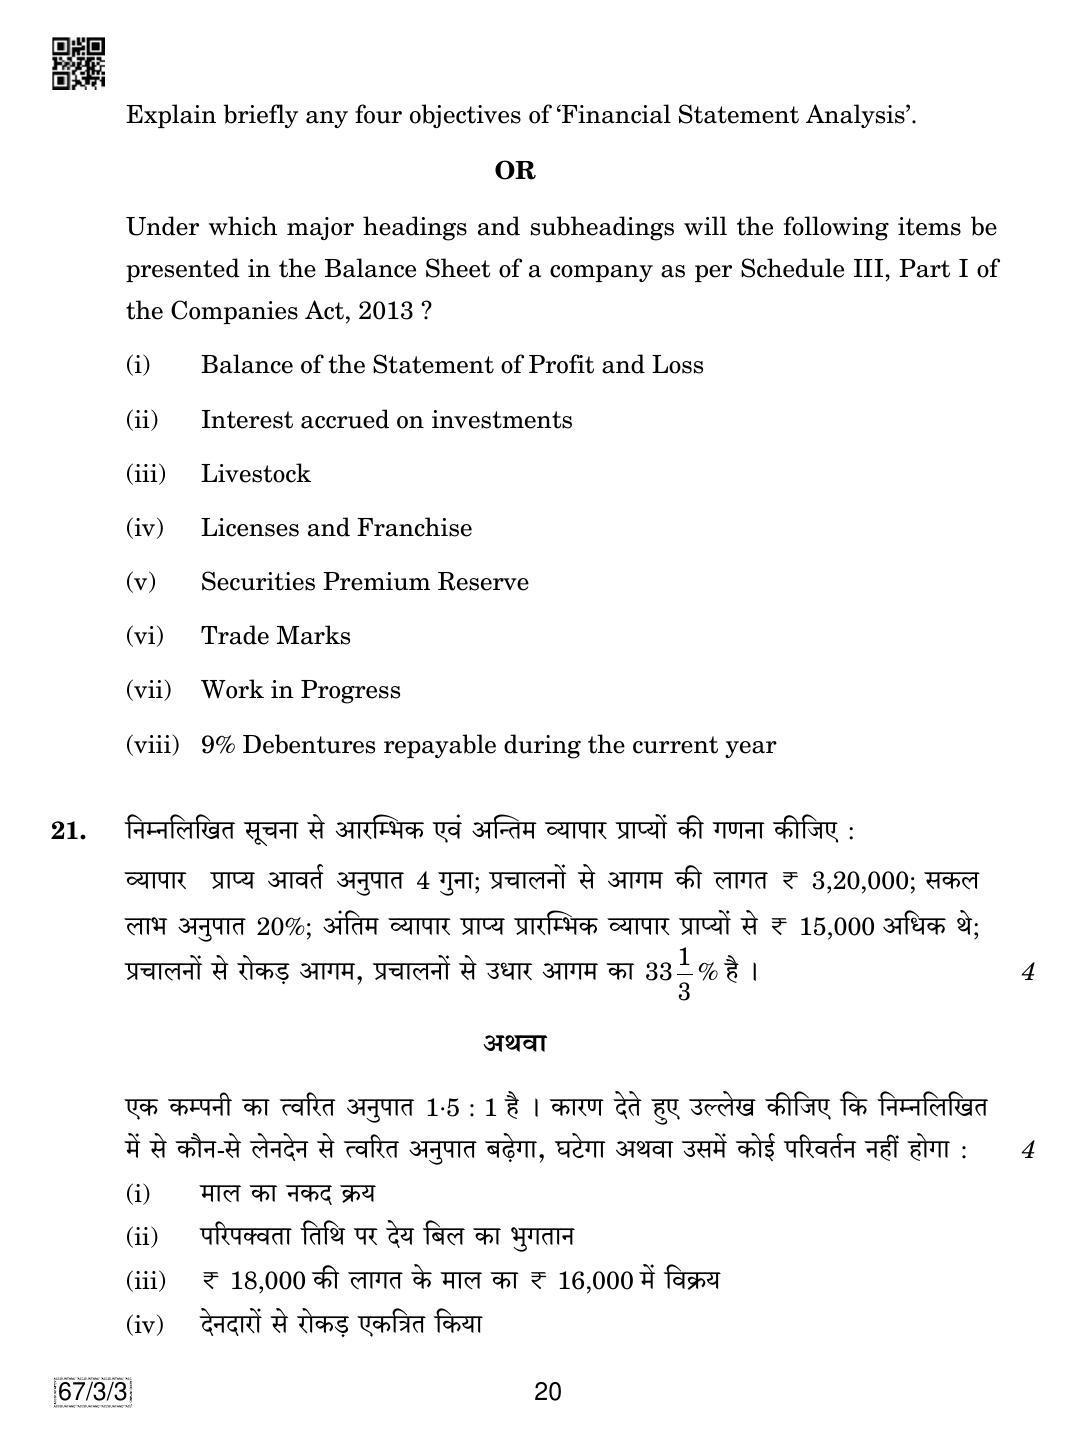 CBSE Class 12 67-3-3 Accountancy 2019 Question Paper - Page 20